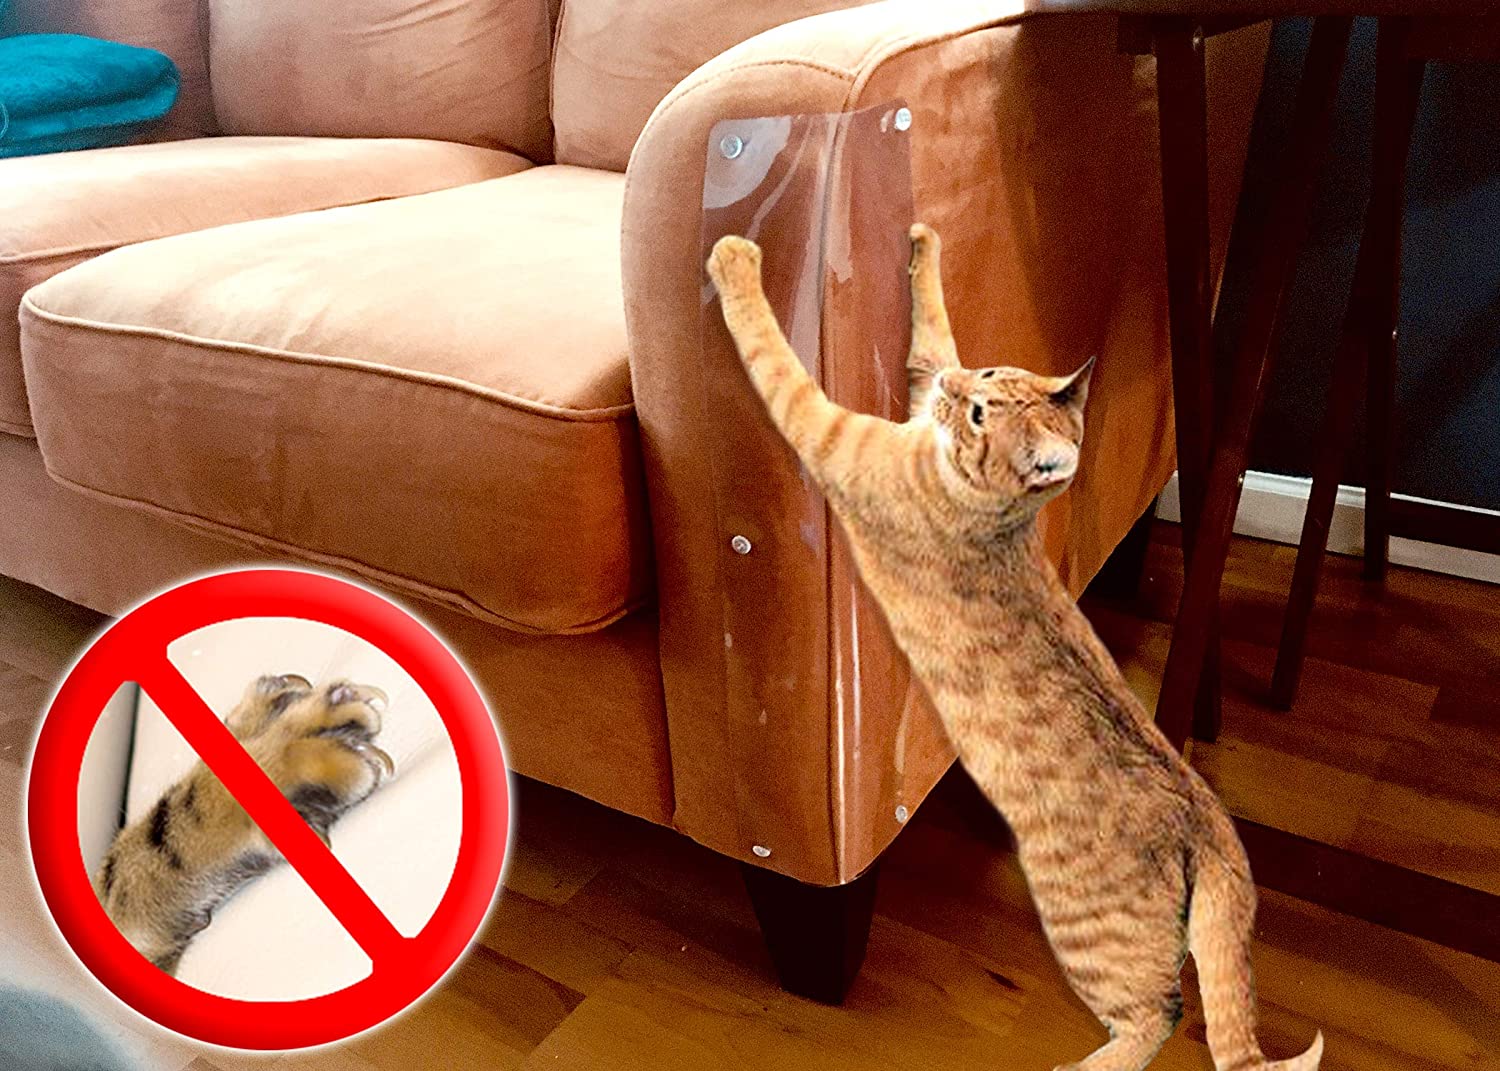 How To Keep Cats From Scratching Leather Furniture